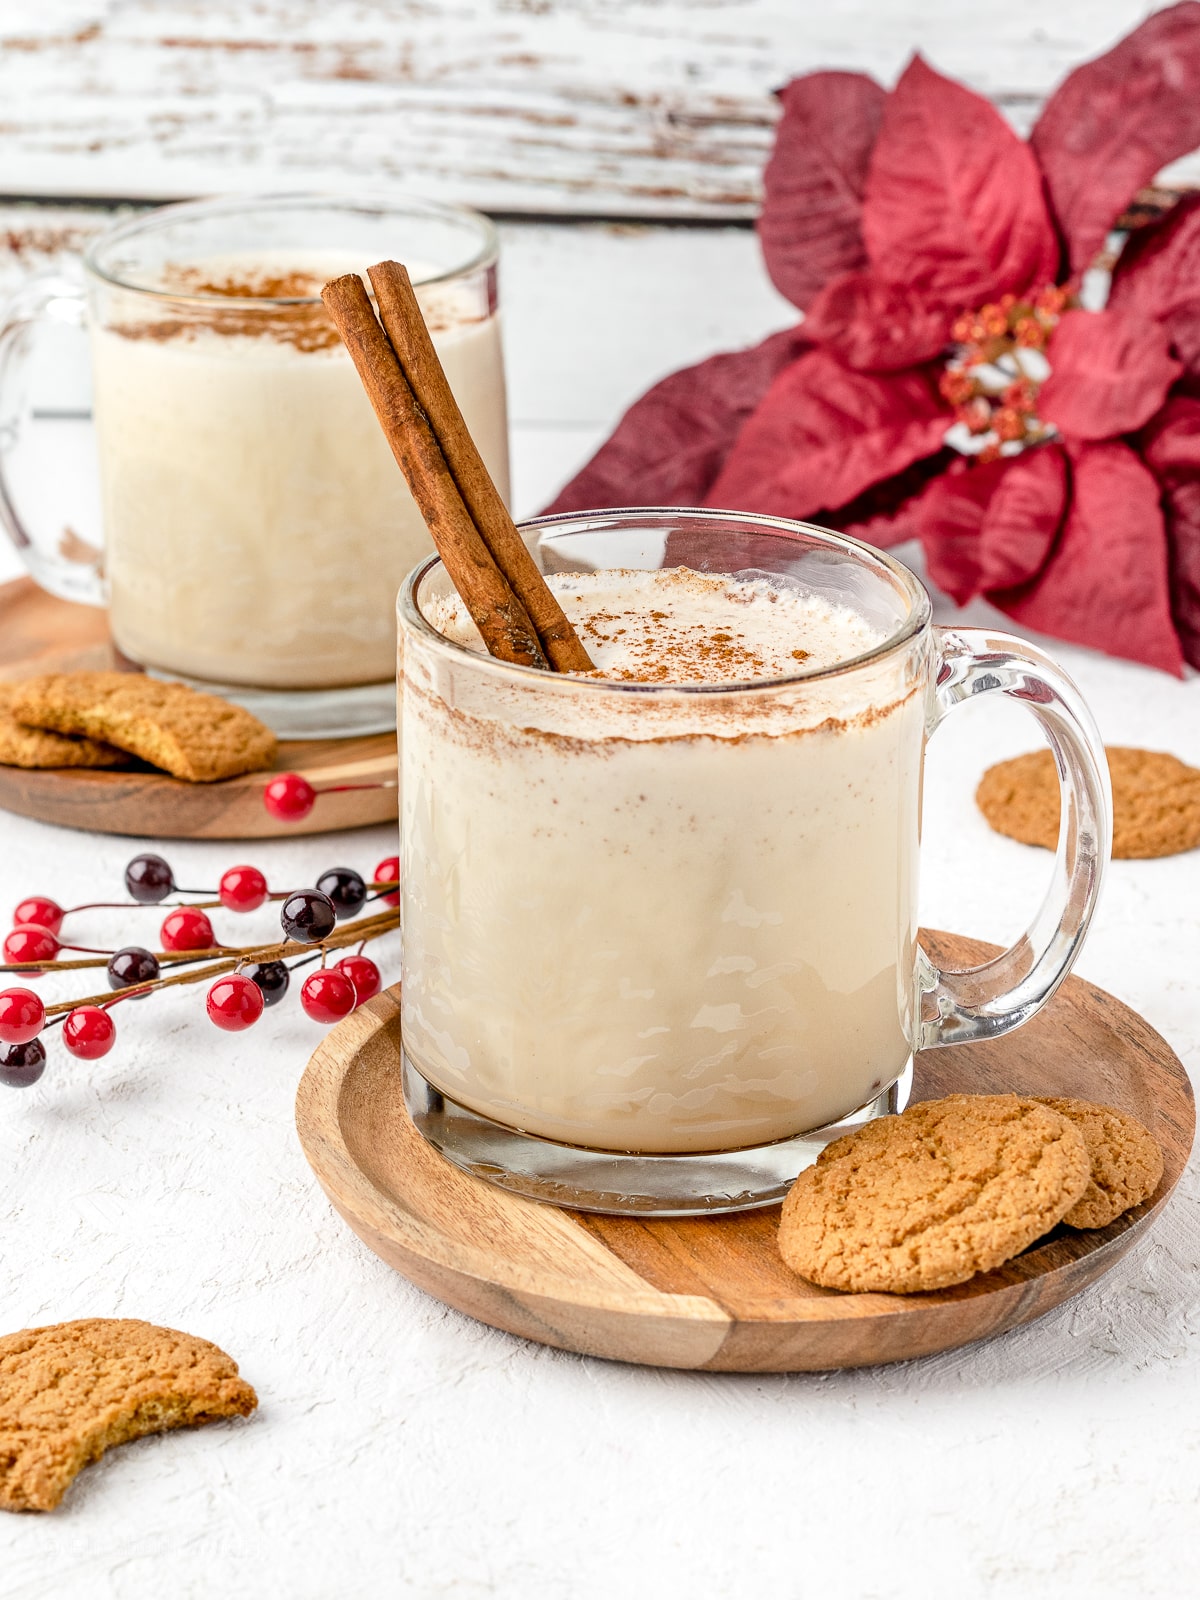 Two mugs of cold coquito garnished with ground cinnamon and a cinnamon stick. Ginger cookies served on the side.